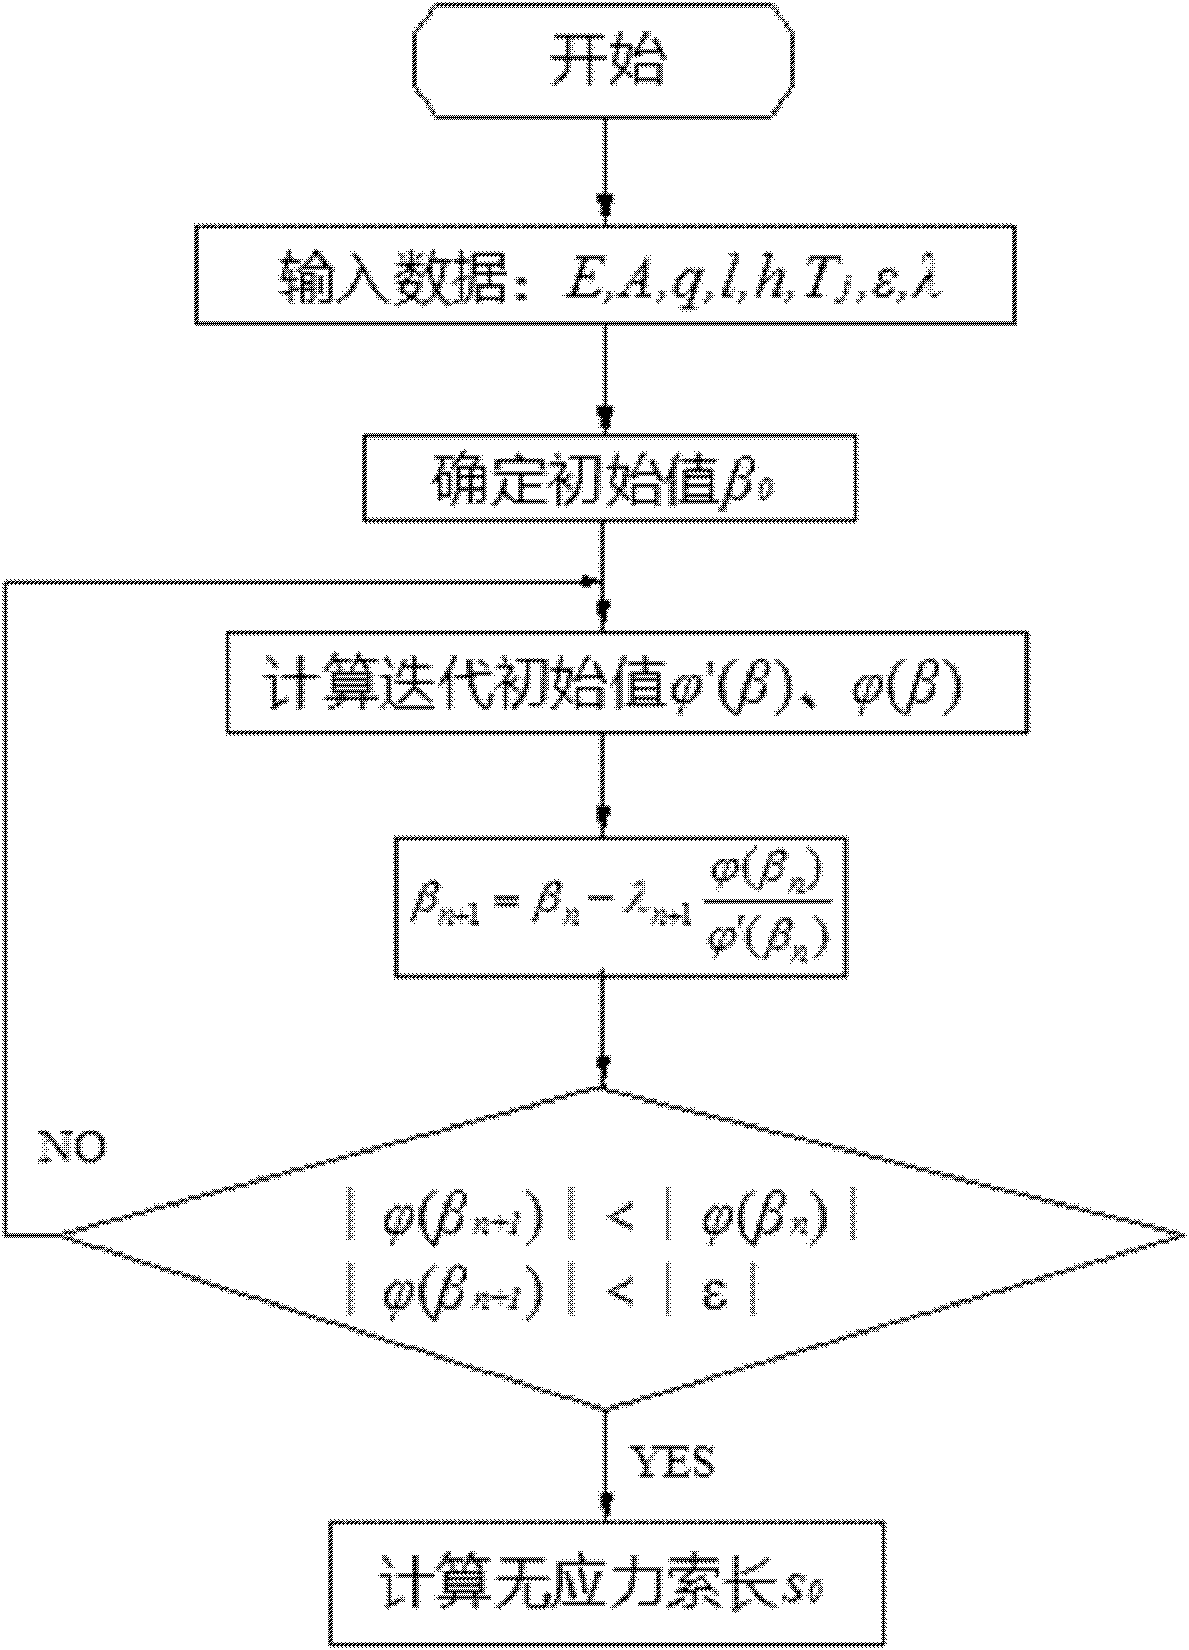 Method for precisely solving length of unstressed cable of cable-stayed bridge